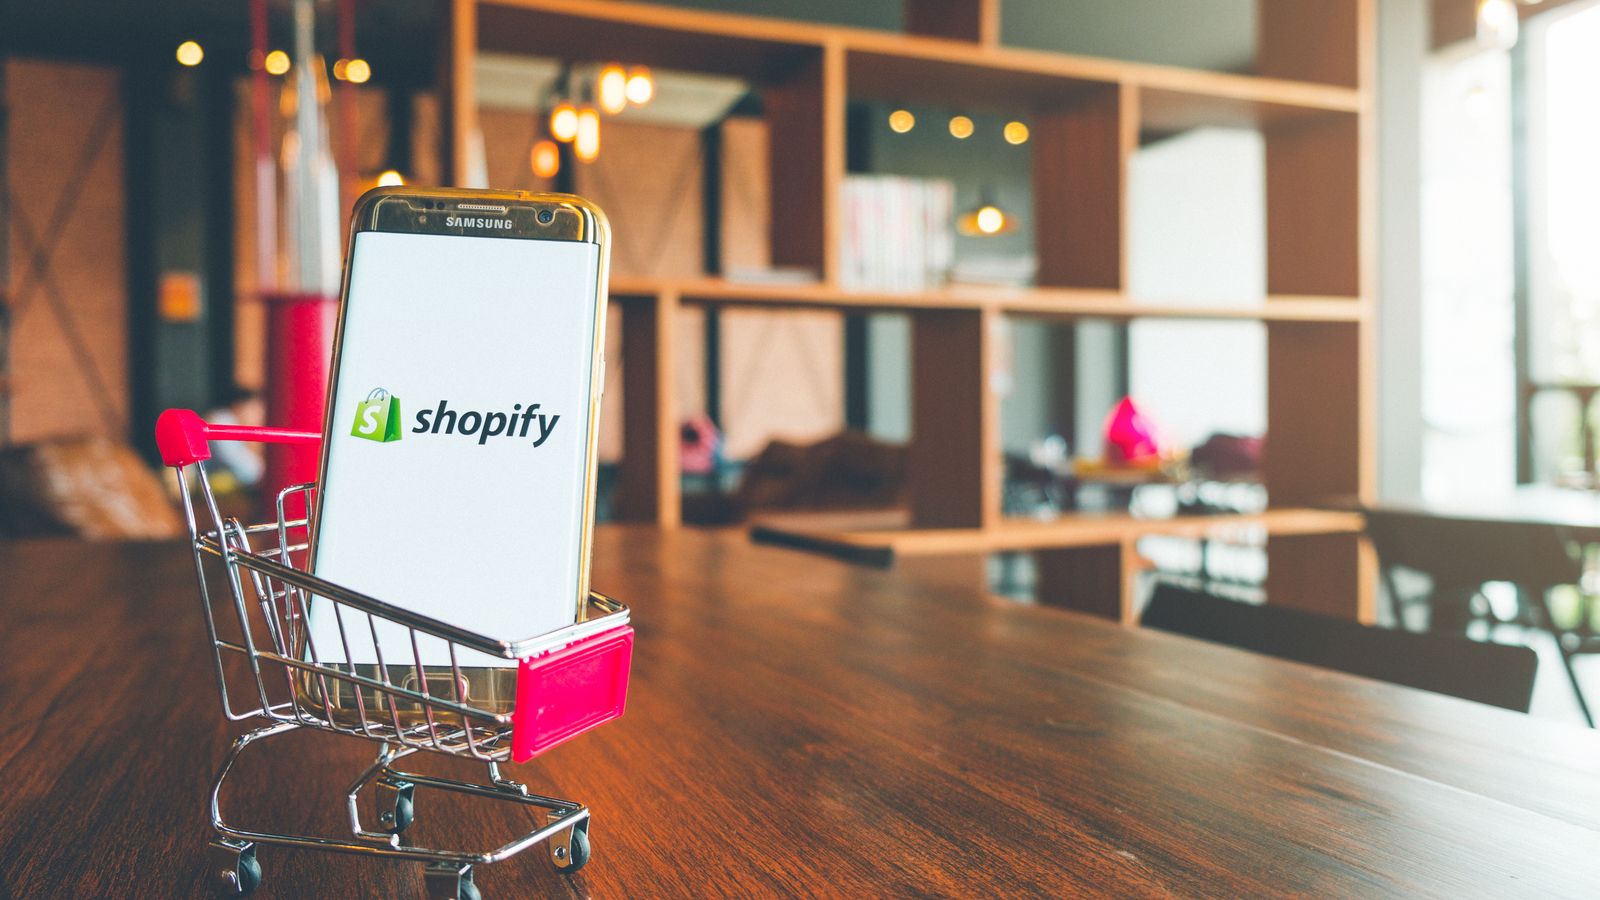 Image of a shopping cart toy on a wooden desk carrying a mobile phone that features the Shopy (SHOP stock) logo on it